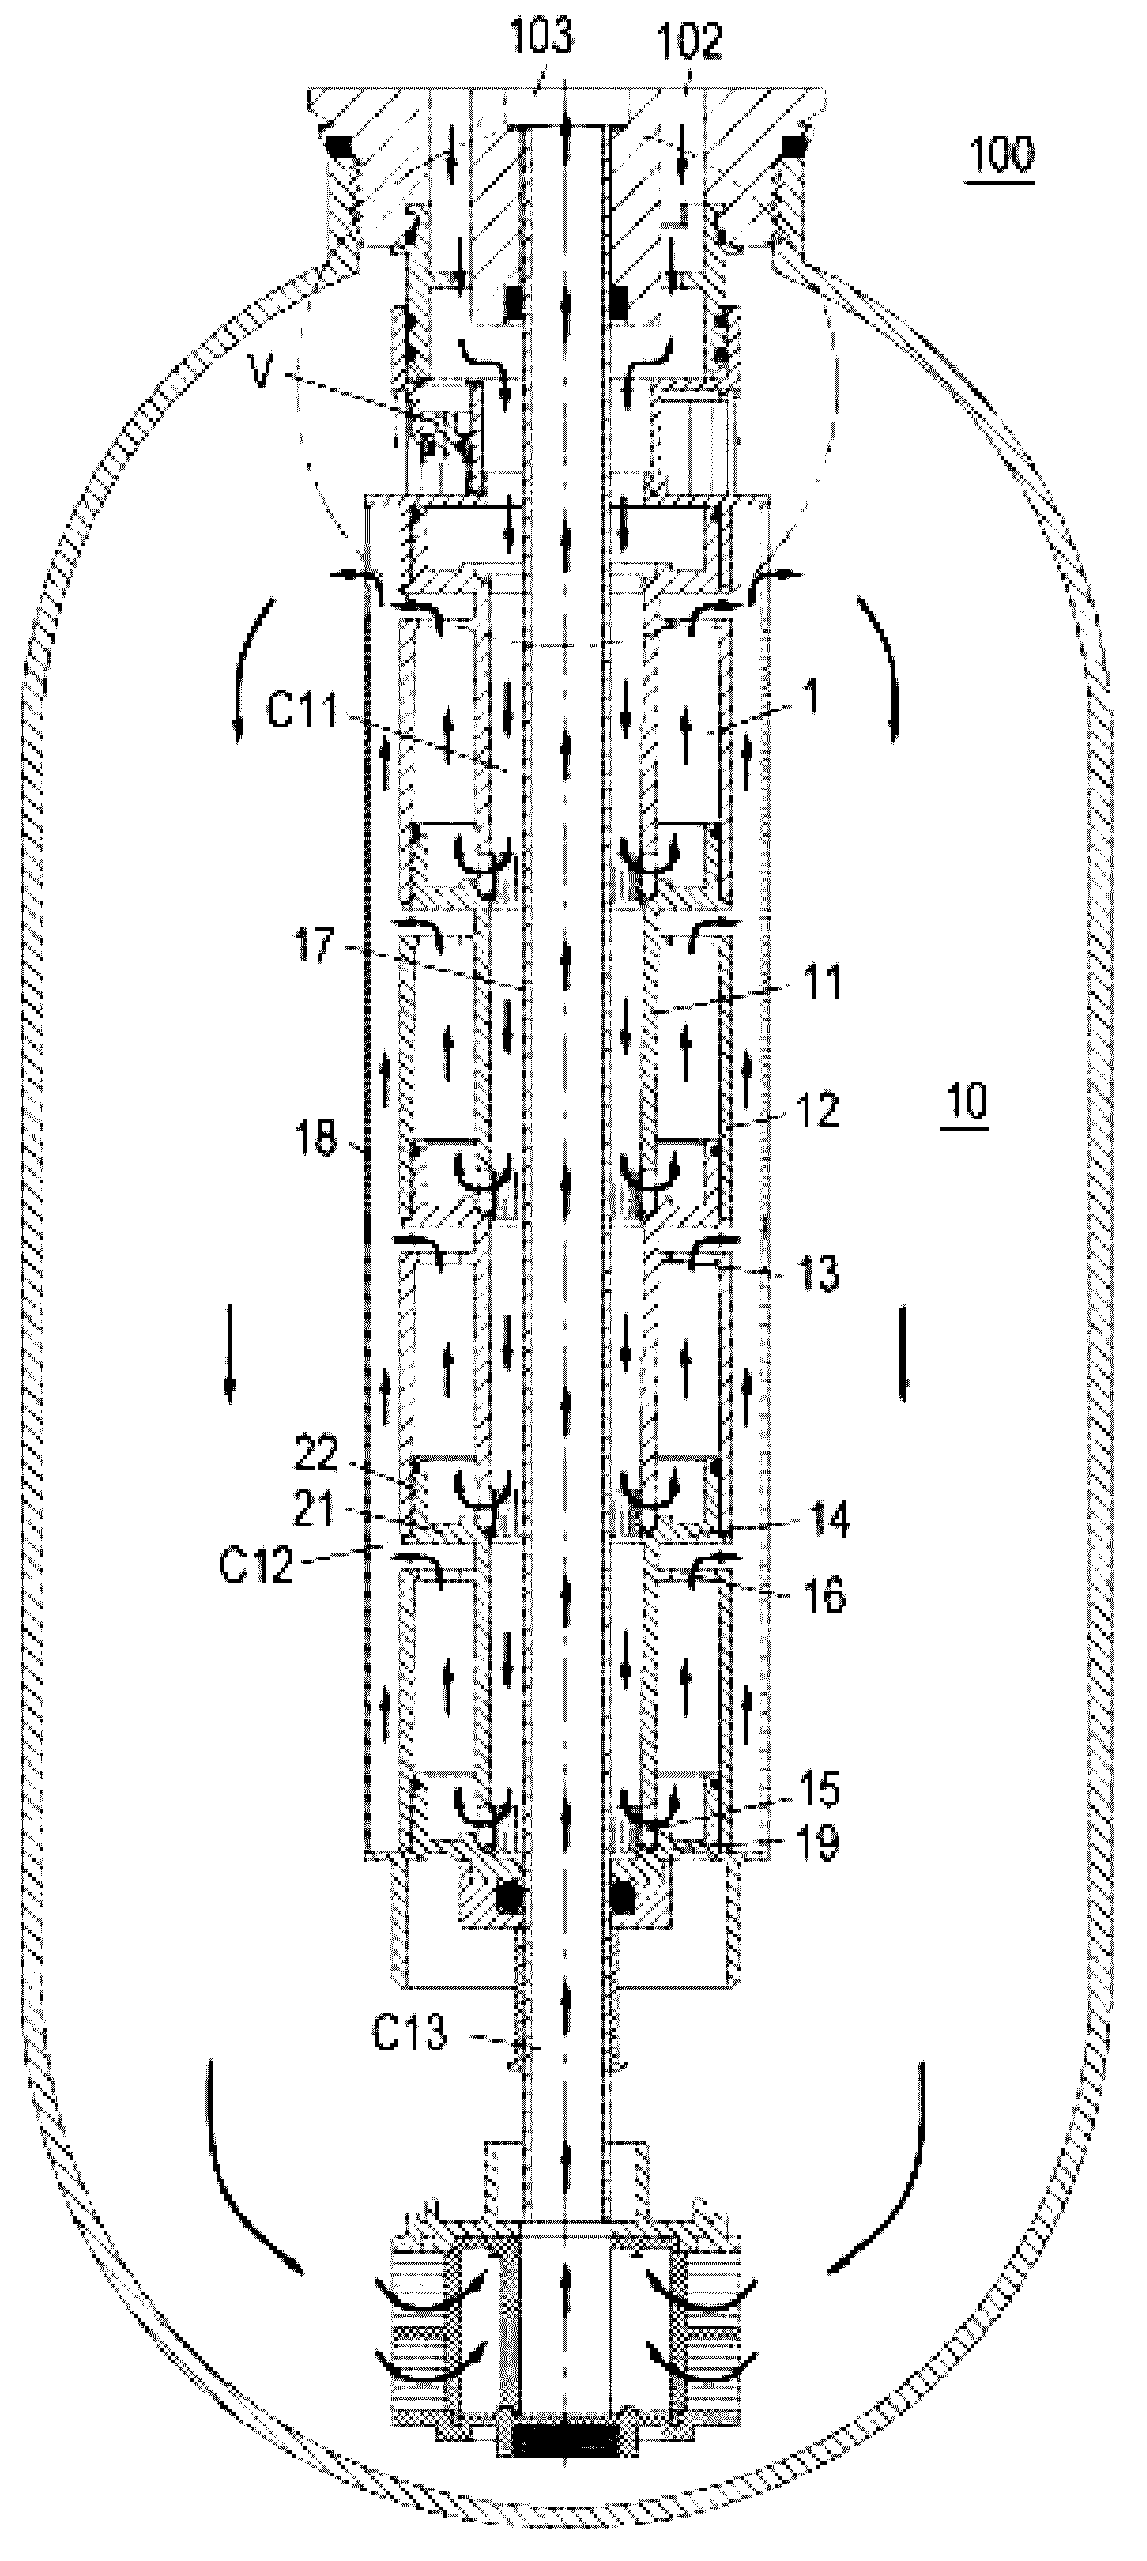 Unit, assembly and apparatus for treating fluid